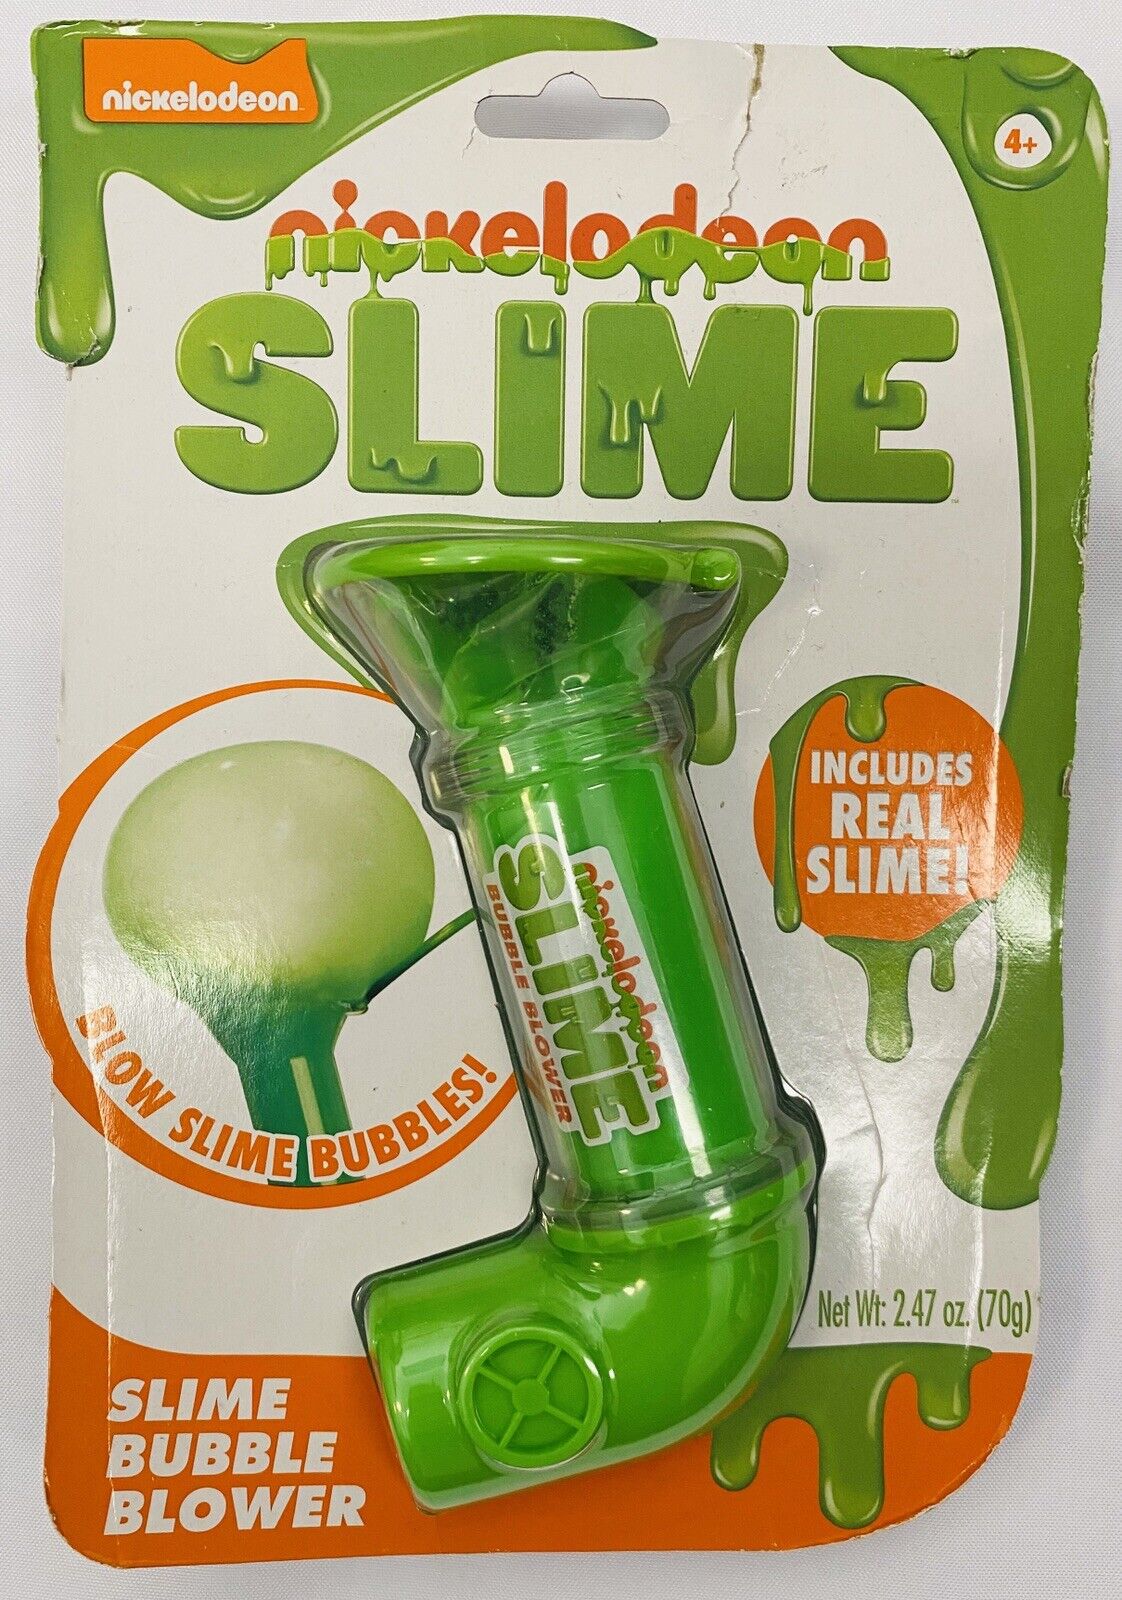 New! Nickelodeon Slime Bubble Blower Includes Real Slime